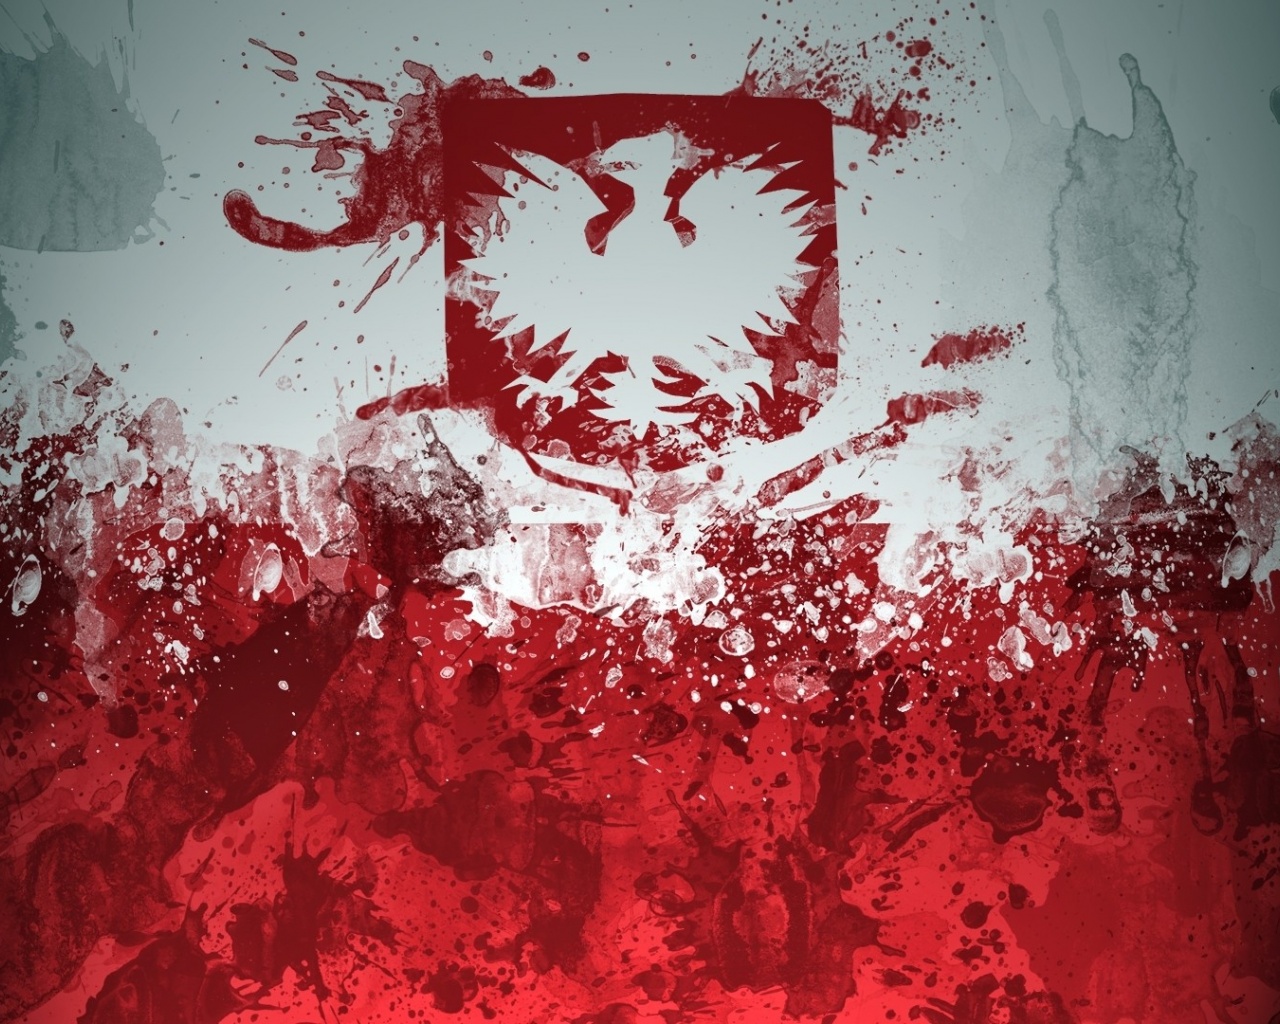 Poland Paint Stain Background